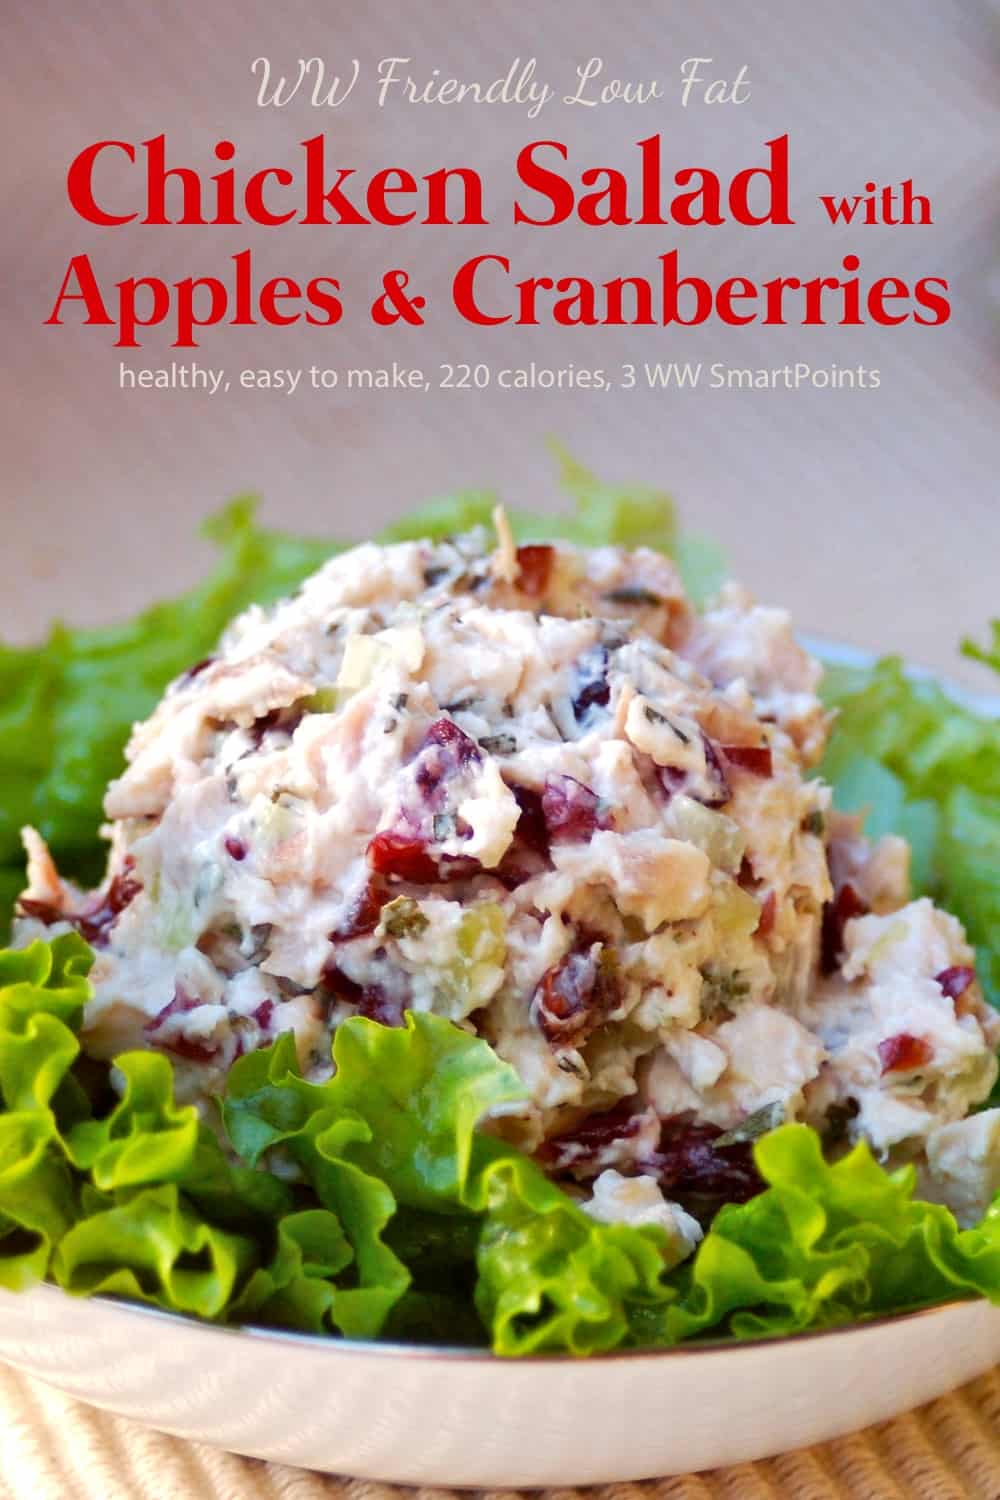 Scoop of low fat chicken salad with apples and cranberries on bed of lettuce.